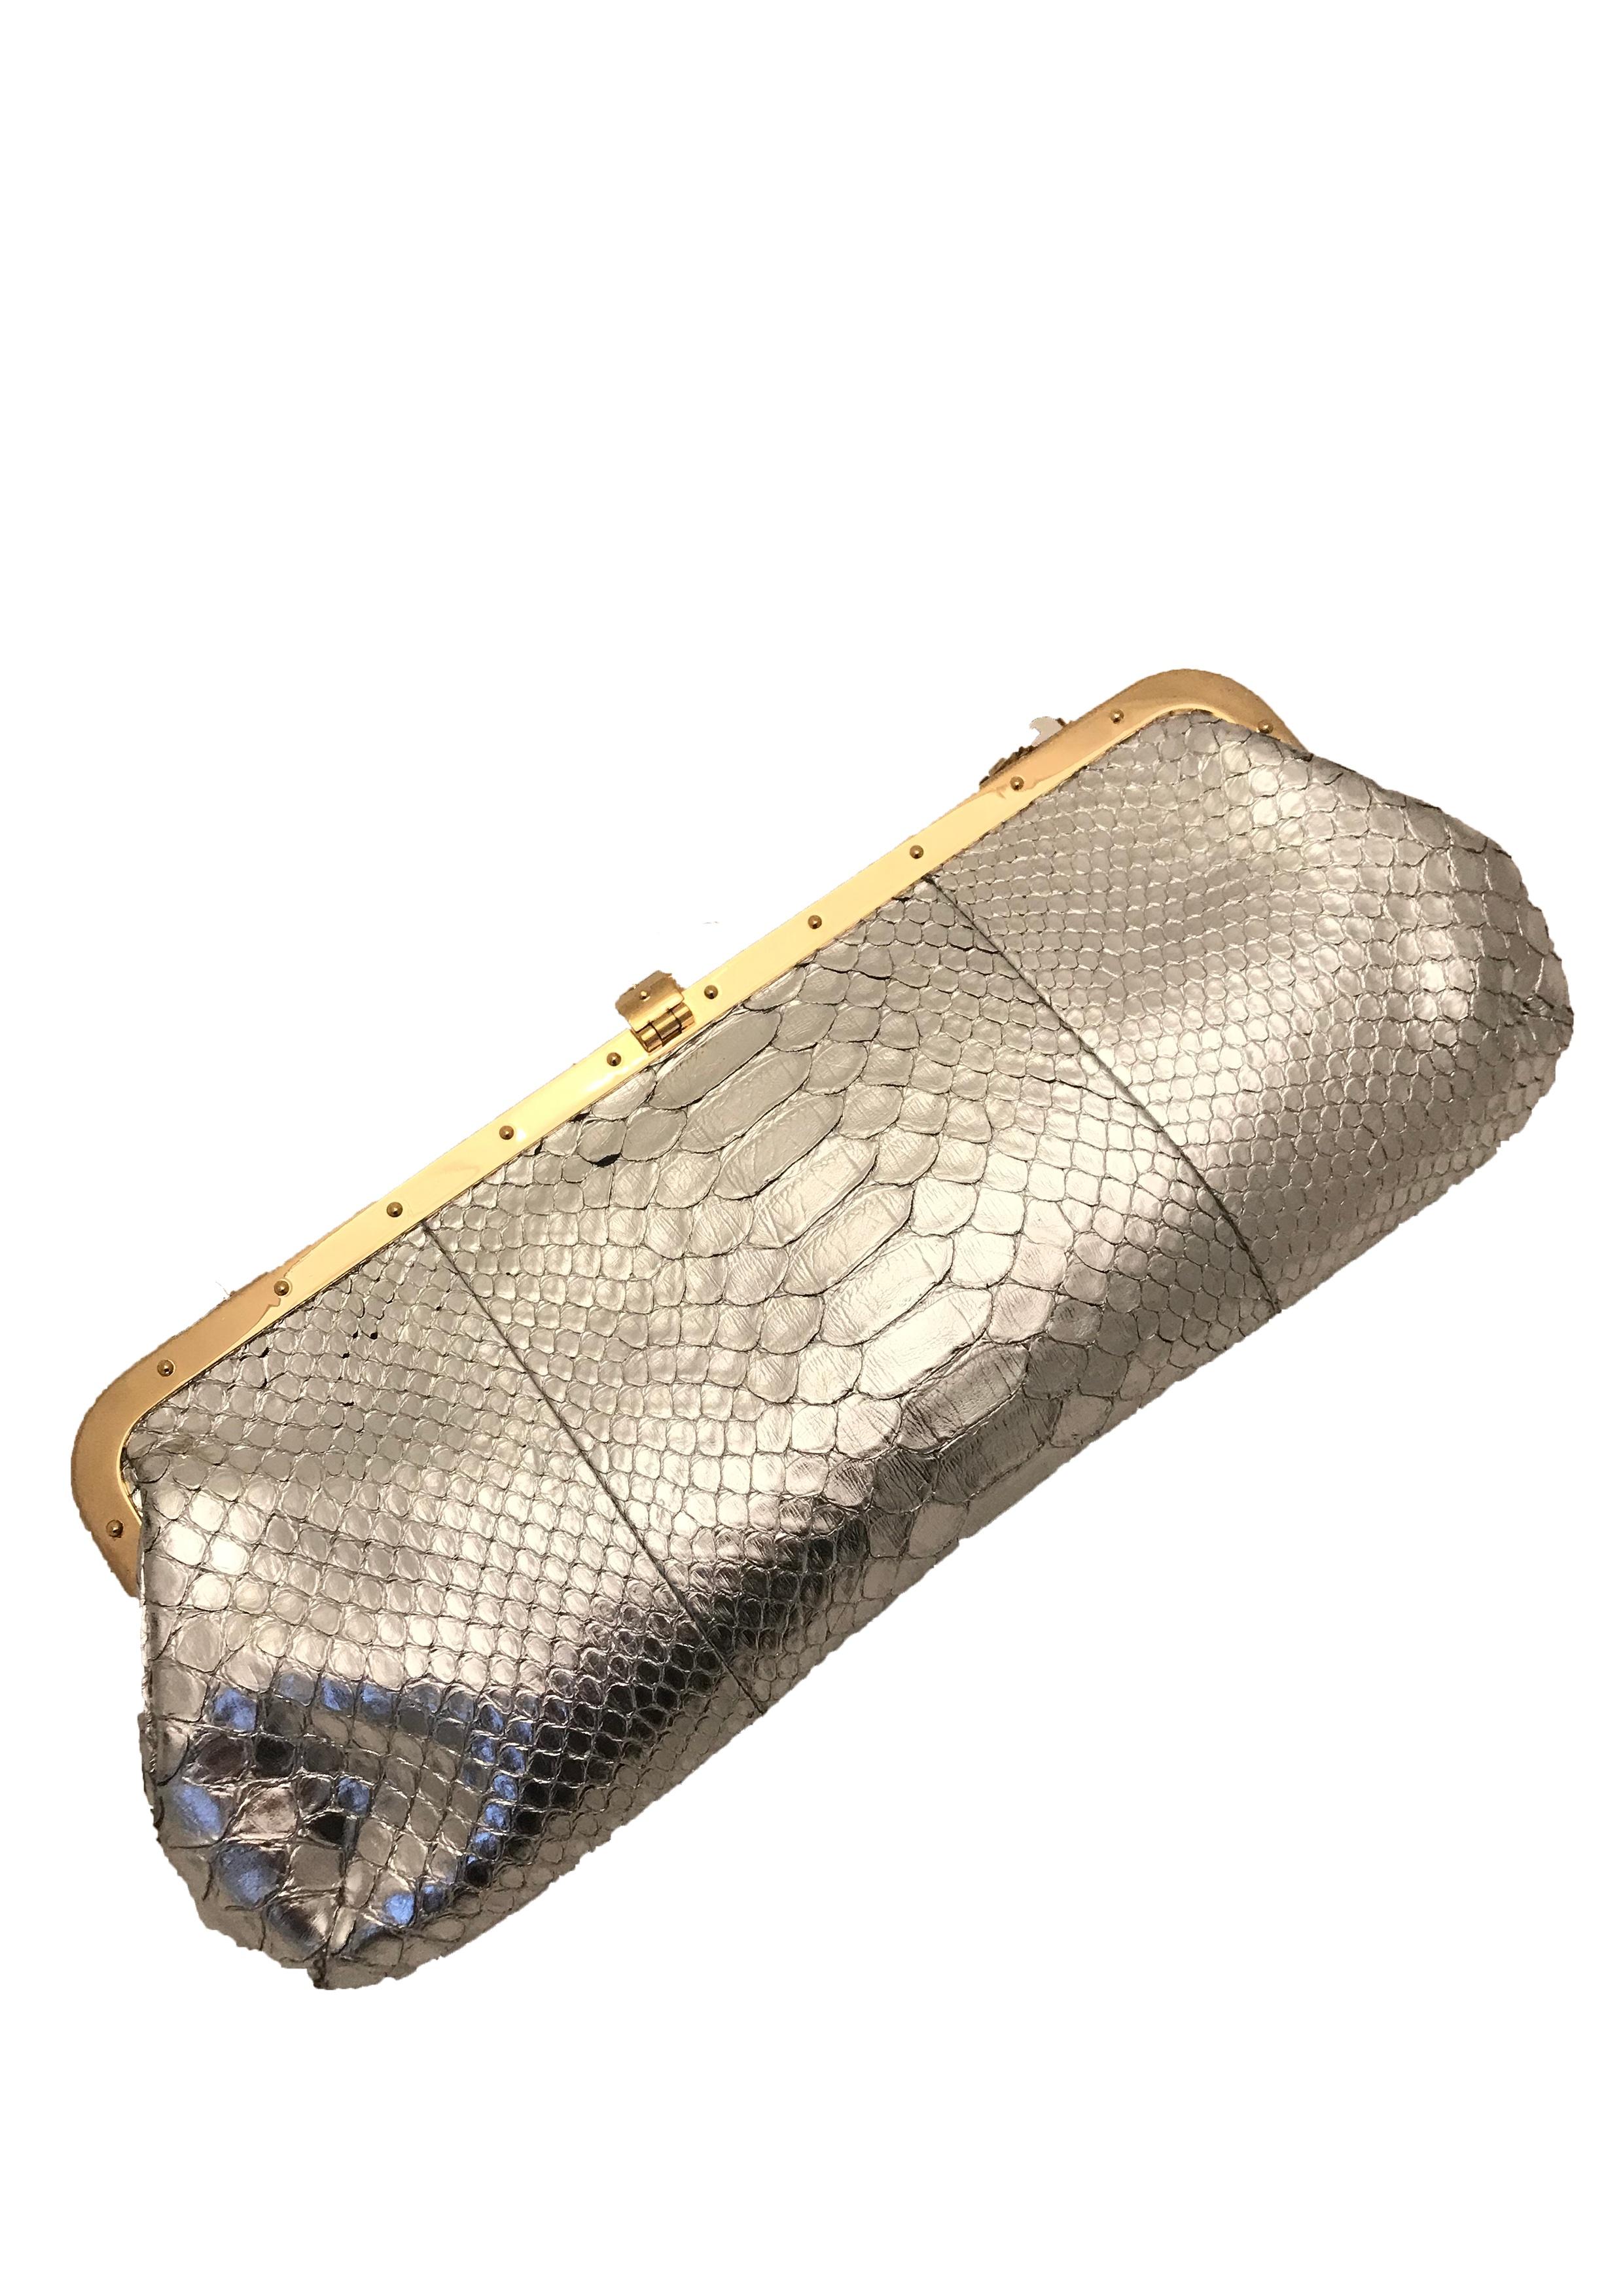 Limited Edition silver python dragon shoulder bag by Tom Ford for Gucci. From the F/W 2004 collection. Metallic silver python skin with shiny gold toned framing and removable bamboo chain strap. Can be worn over the shoulder, or as a clutch bag with